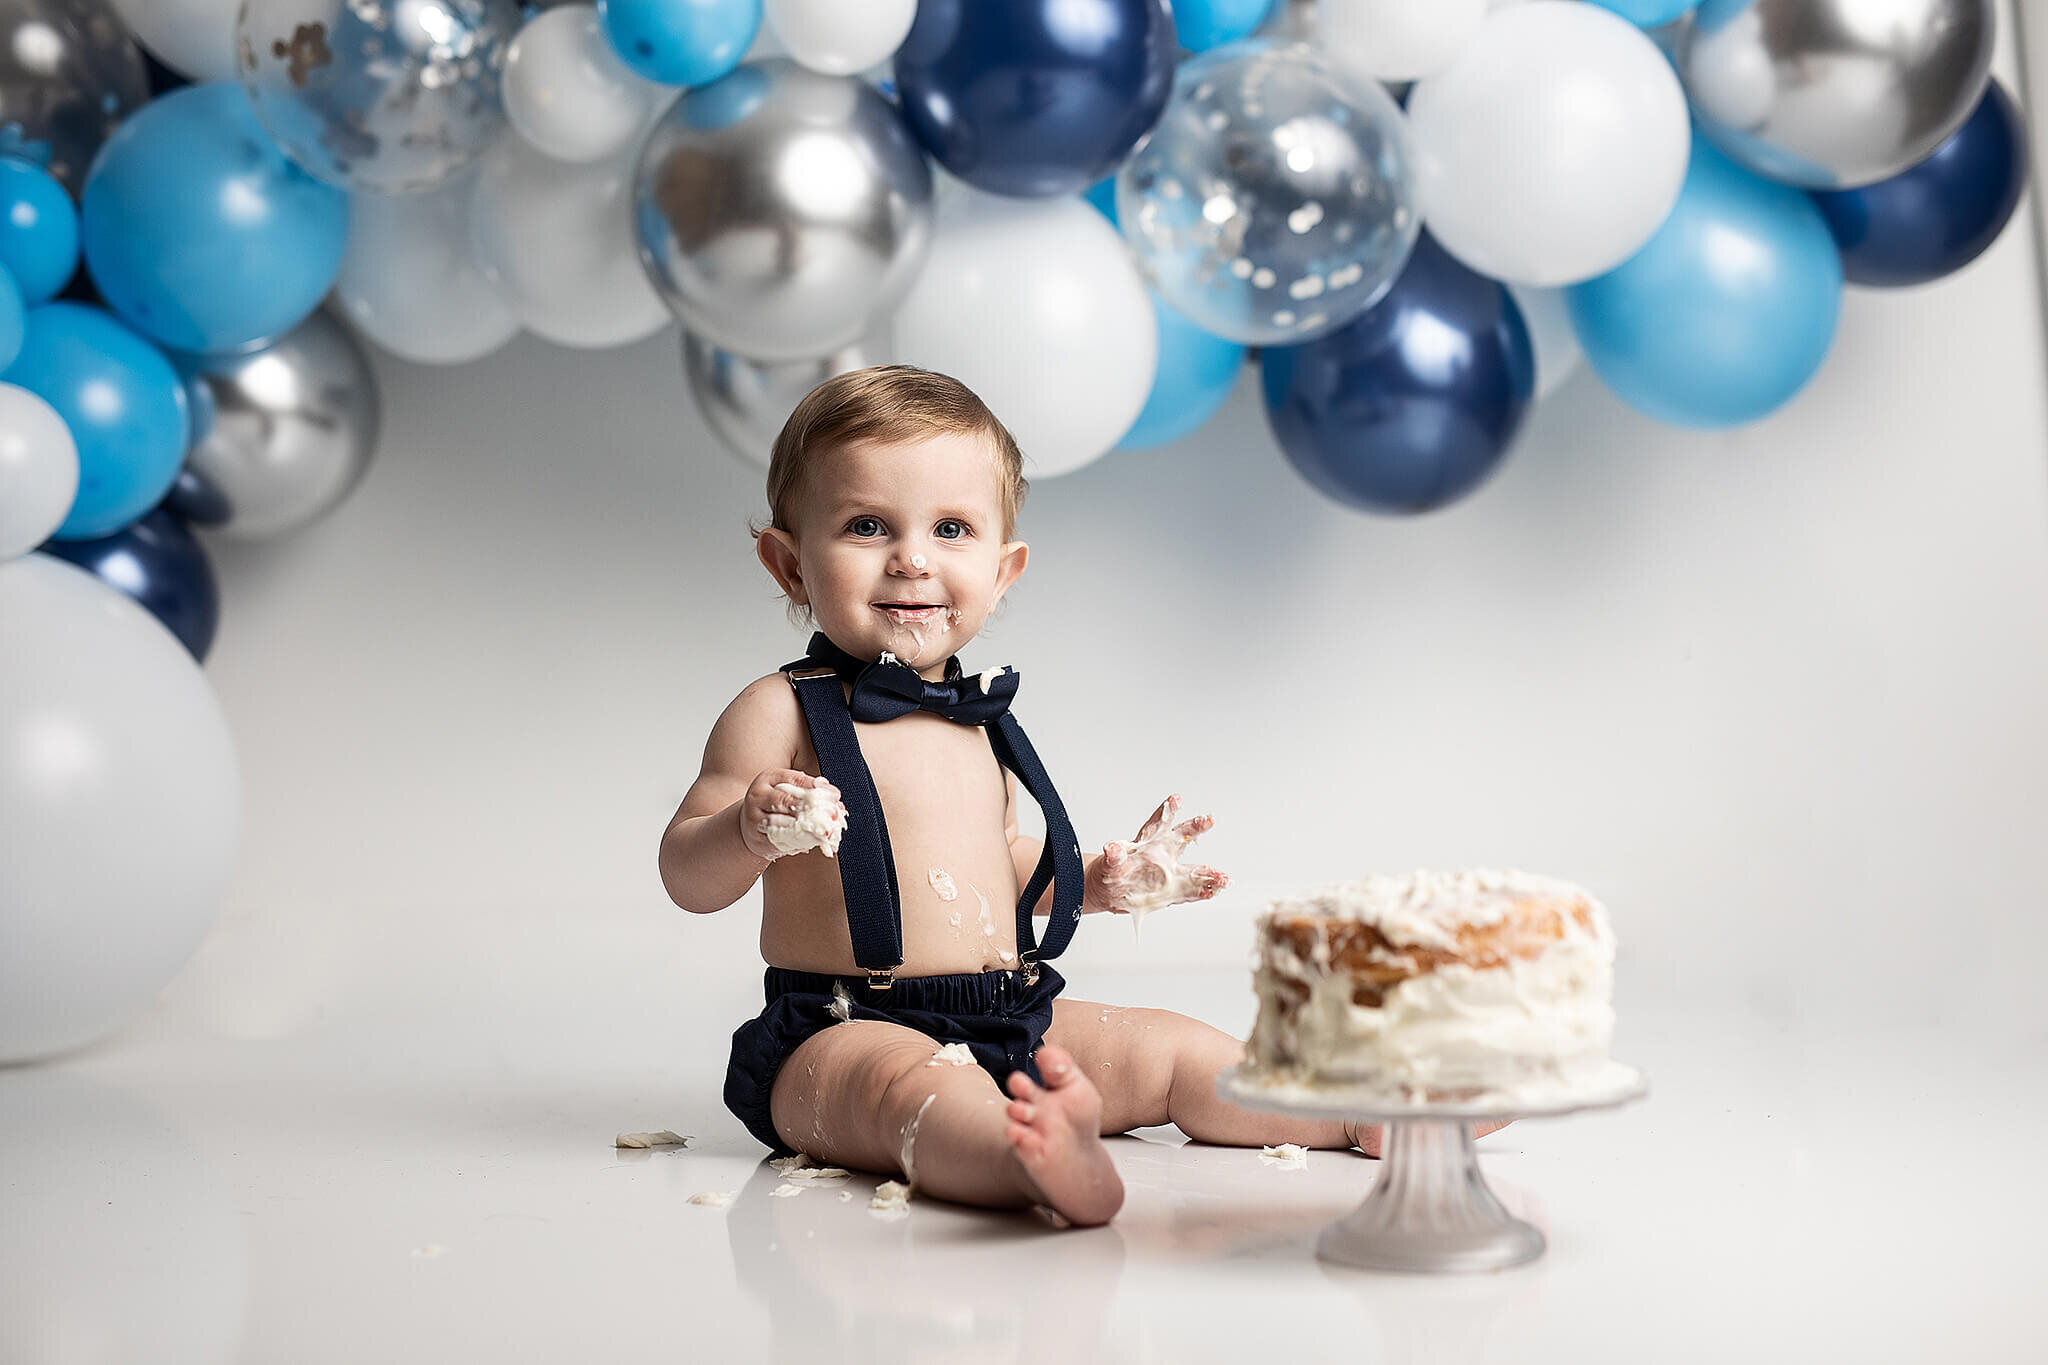 One year old little boy sitting on white flooring with white cake, and blue, silver and white balloons